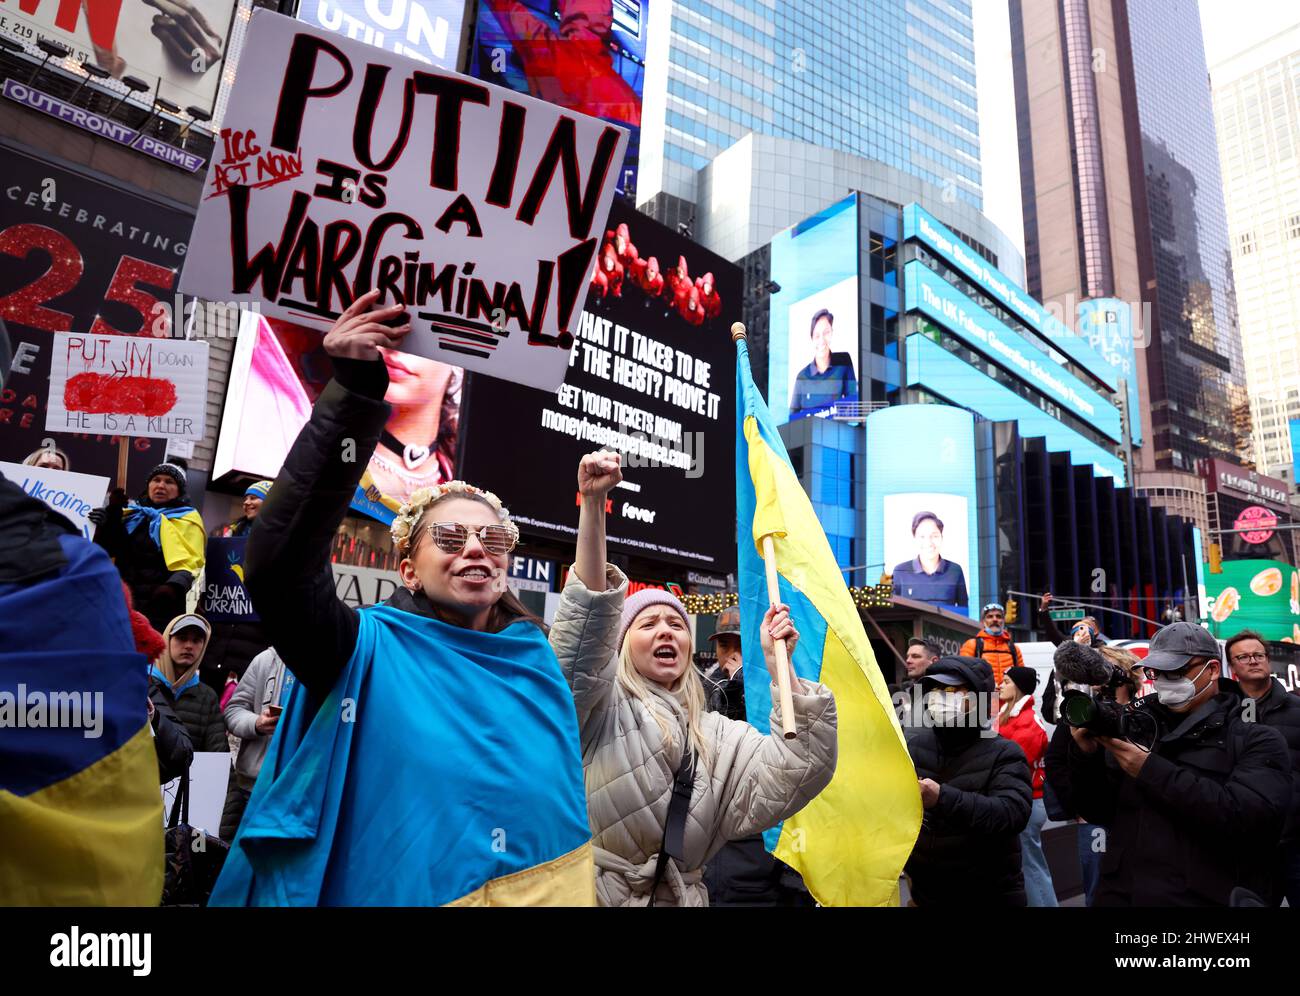 New York, USA. 5th March 2022 -- New York City, New York, Unites States: Demonstrators protesting Russia's invasion of Ukraine at a rally in New York City's Times Square this afternoon. Credit: Adam Stoltman/Alamy Live News Stock Photo